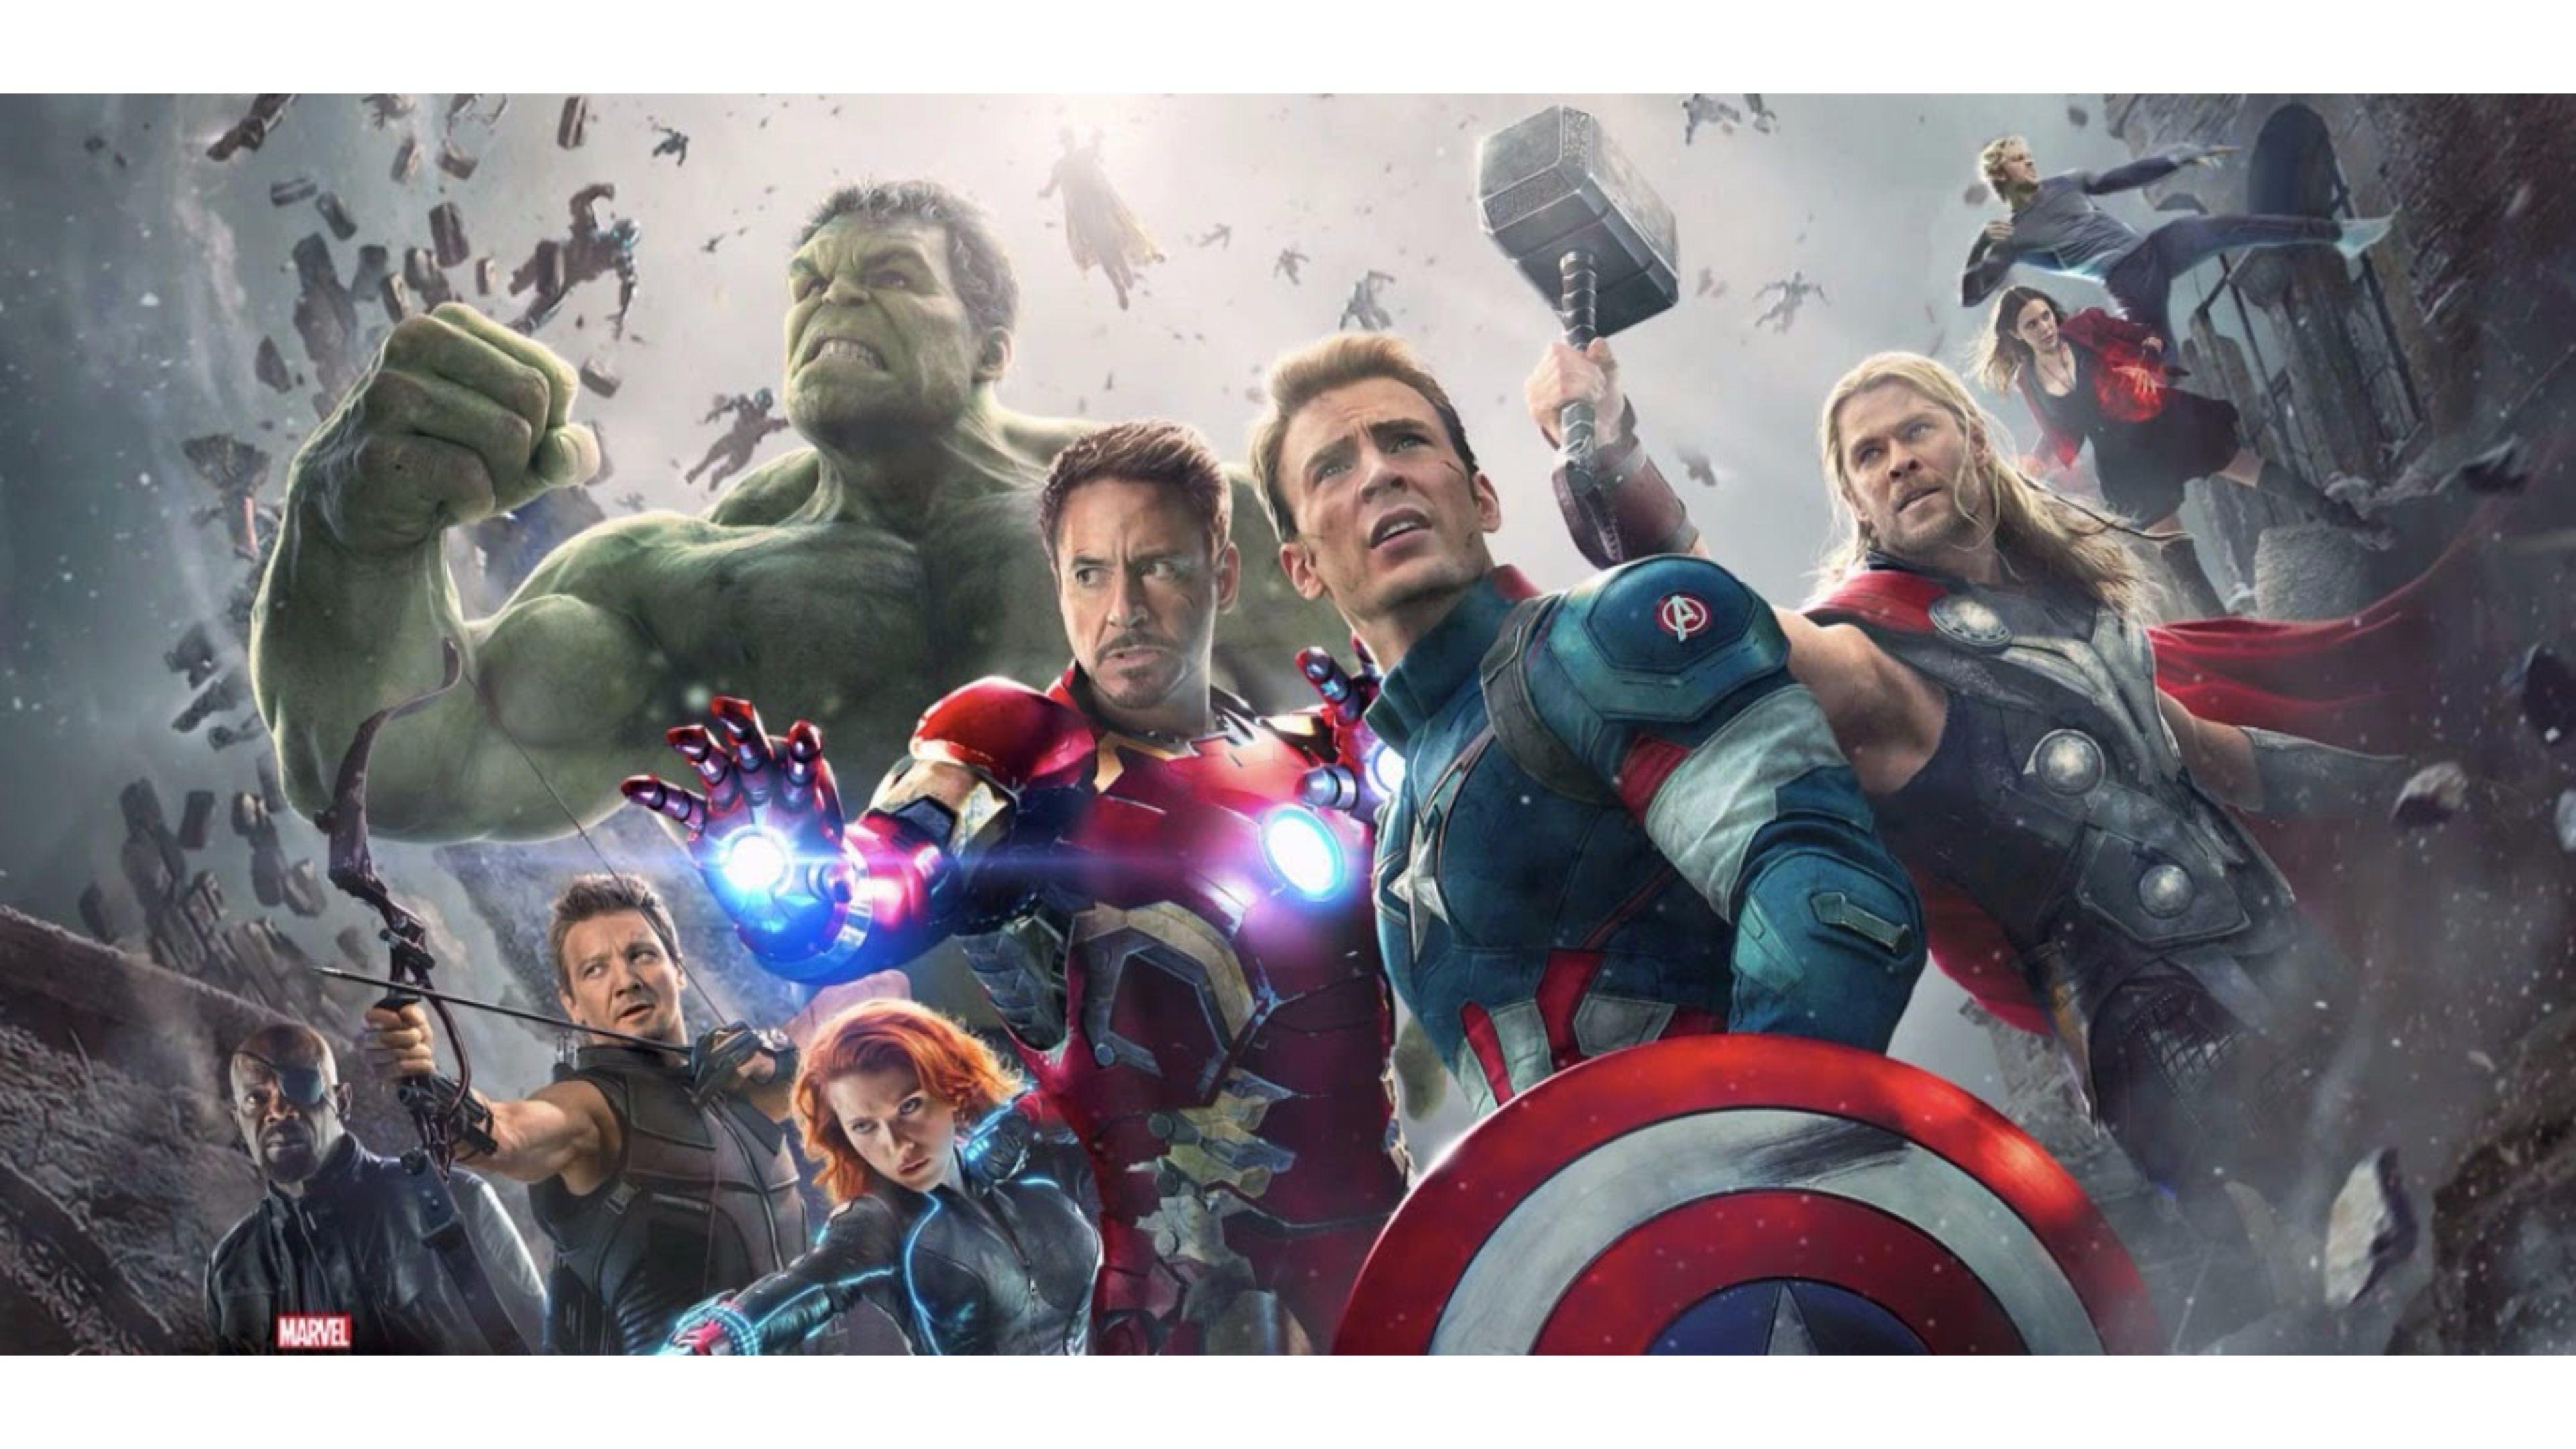 Marvel Avengers Wallpaper 4K For Pc - Here you can find the best